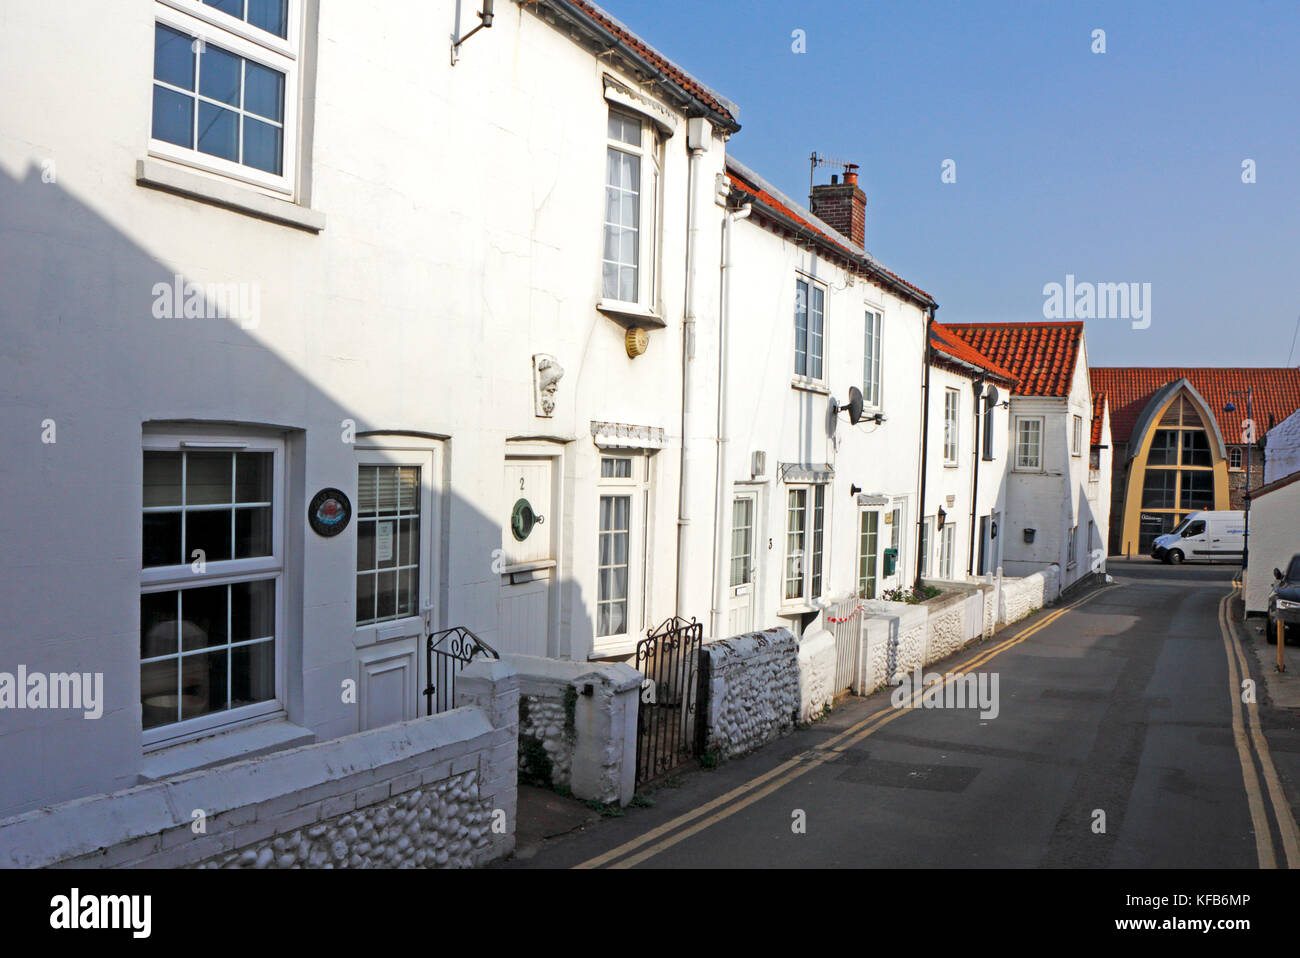 A Terrace Of Old Cottages Near The Seafront In The North Norfolk